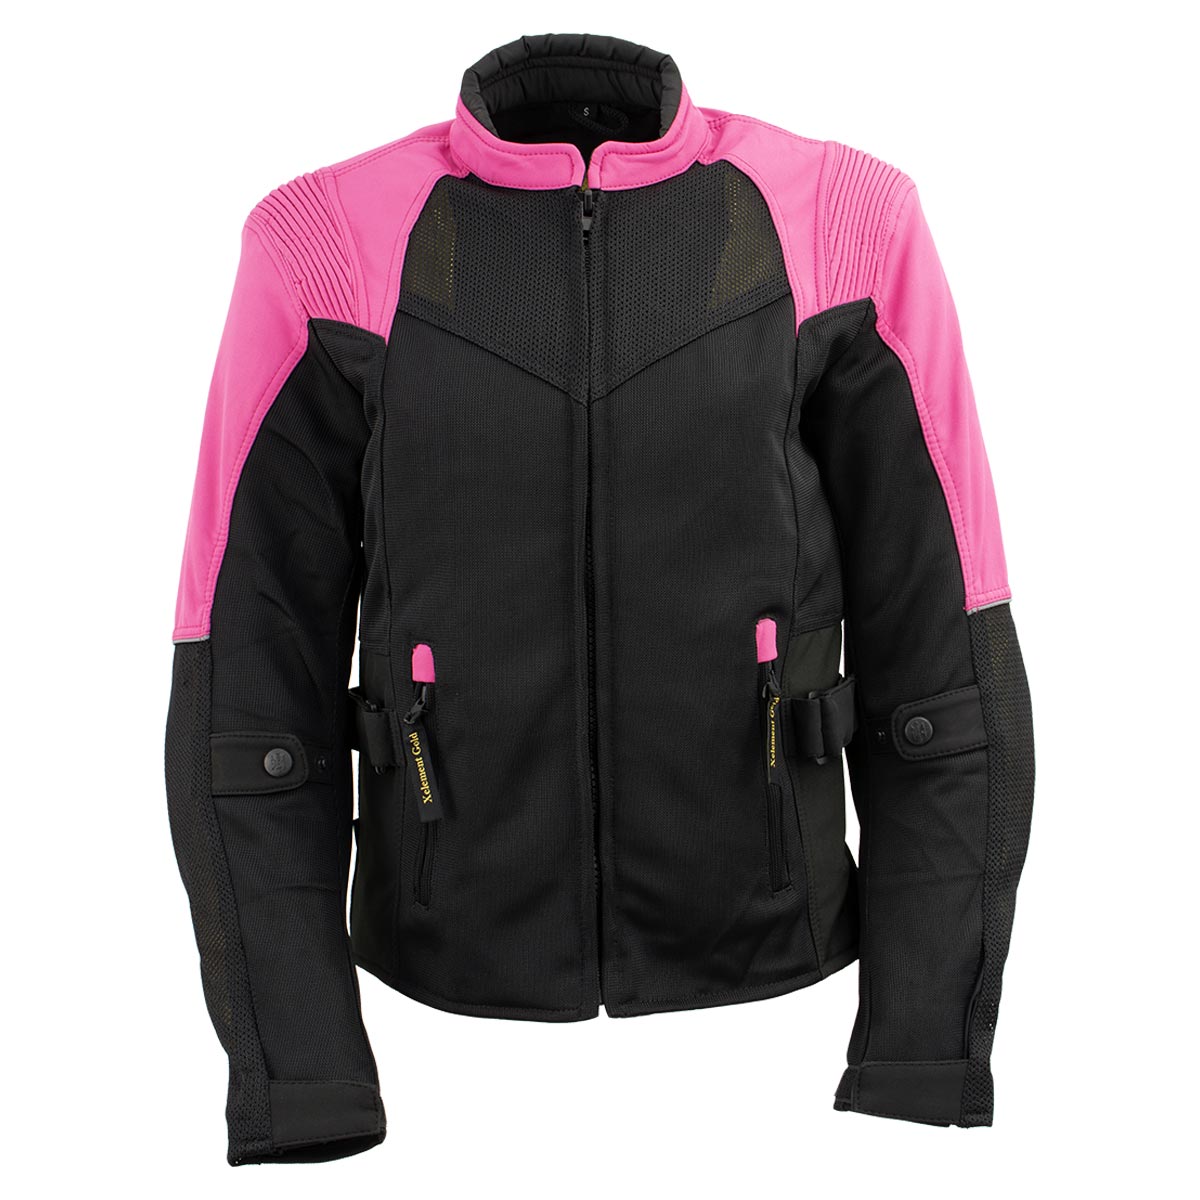 Xelement 'Gold Series' XS22009 Women's 'Be Cool' Black and Fuchsia Armored Textile with Soft-Shell Motorcycle Jacket